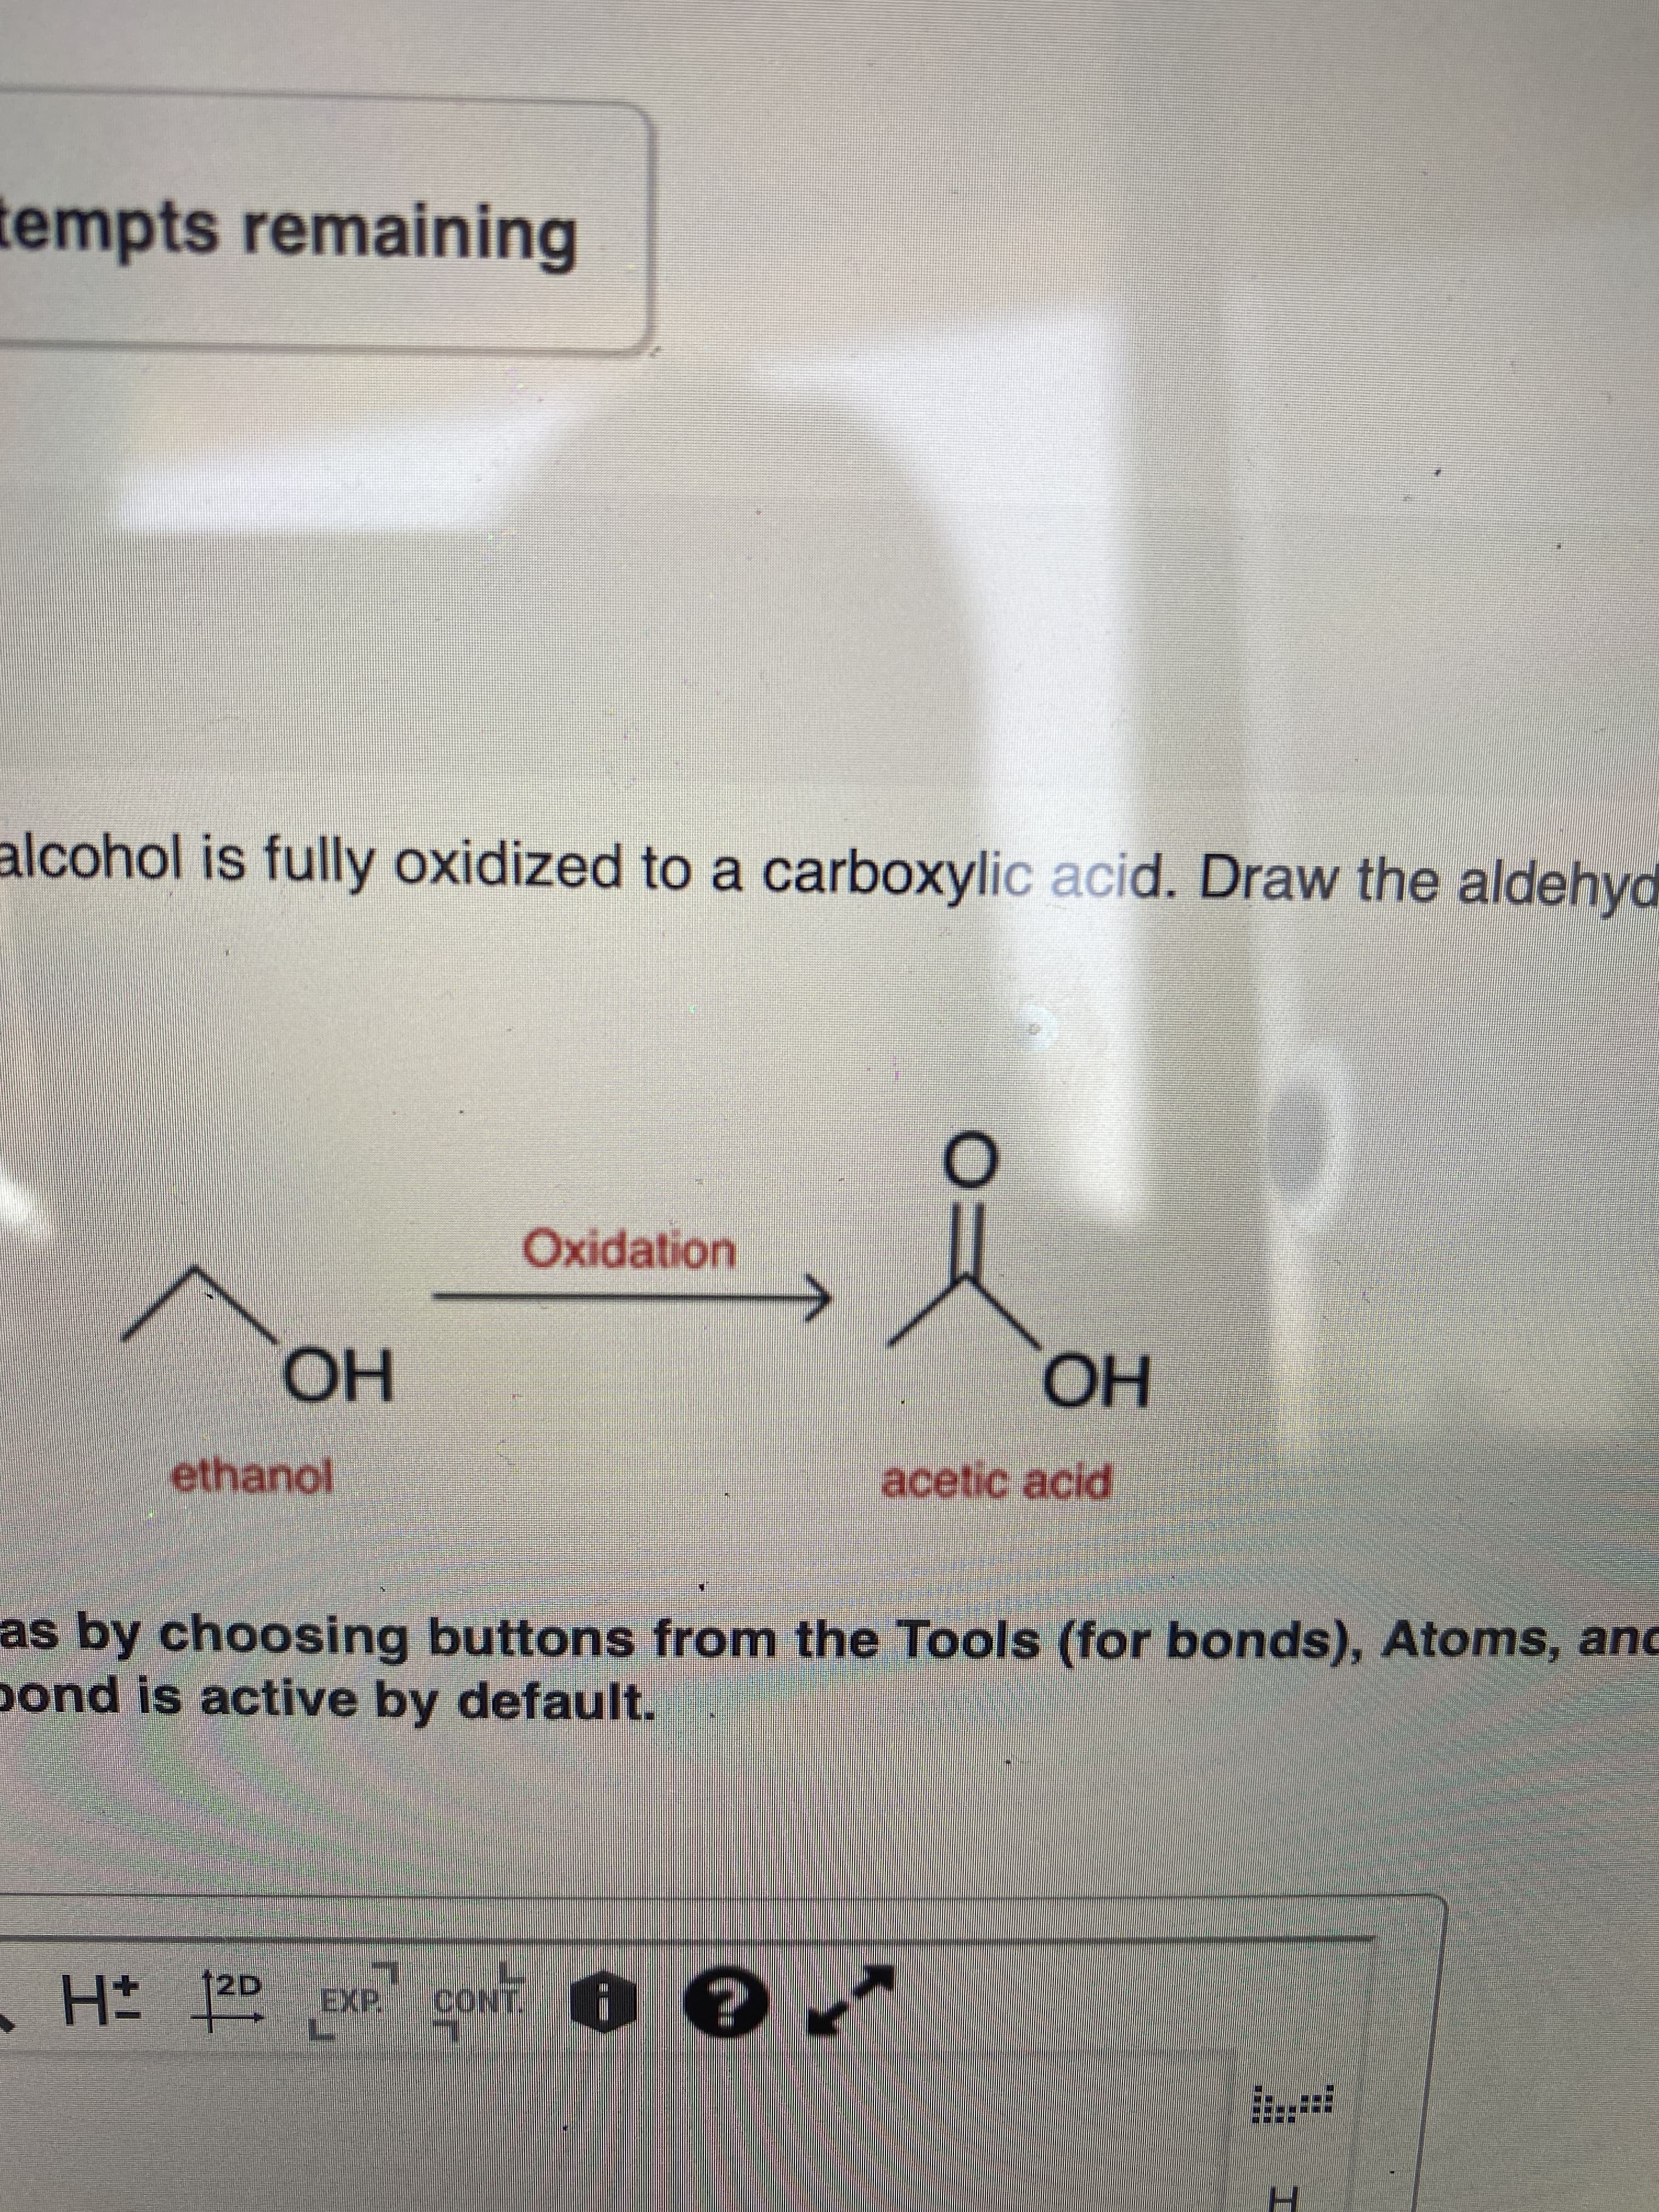 tempts remaining
alcohol is fully oxidized to a carboxylic acid. Draw the aldehyd
Oxidation
но
acetic acid
но
ethanol
as by choosing buttons from the Tools (for bonds), Atoms, and
pond is active by default.
12D
EXP
